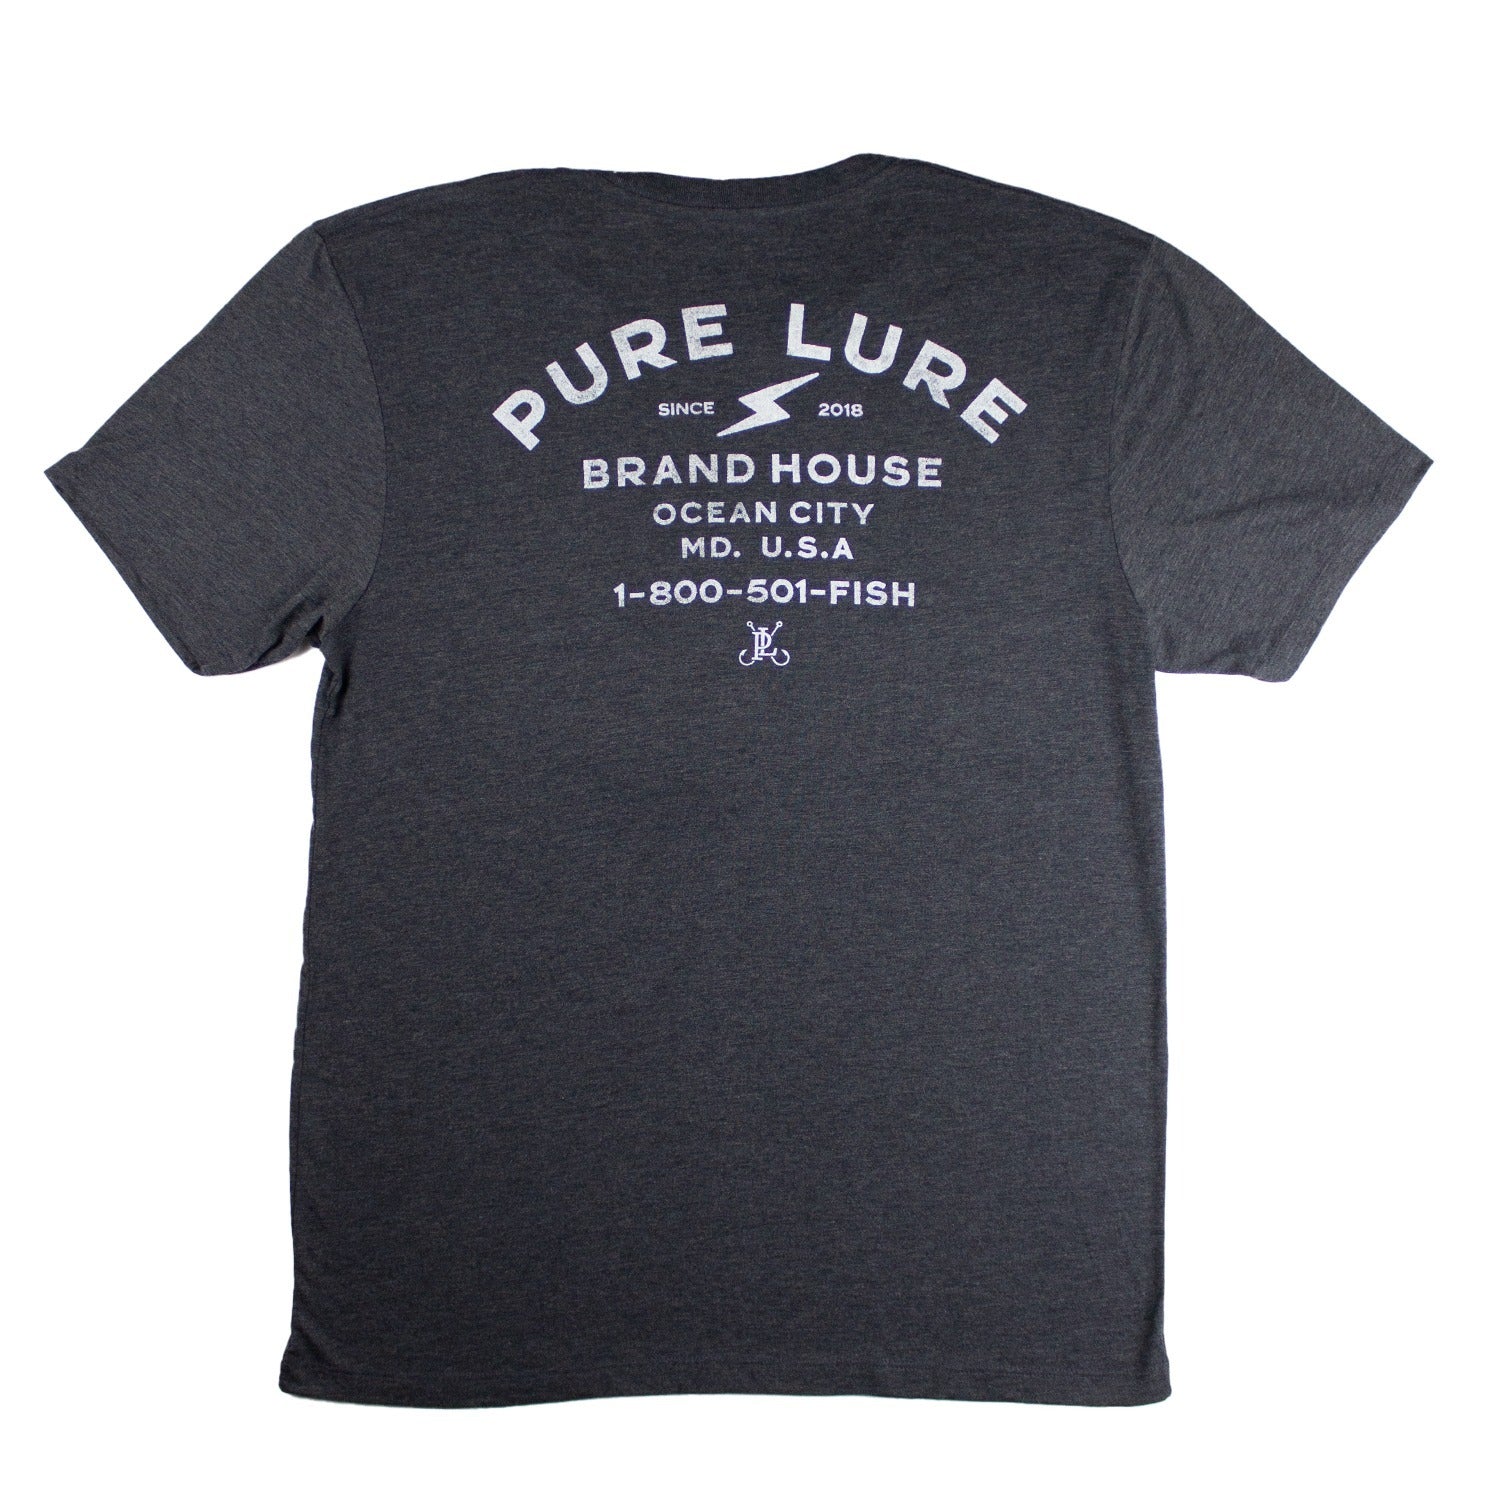 Brand House T-Shirt Charcoal Heather / S